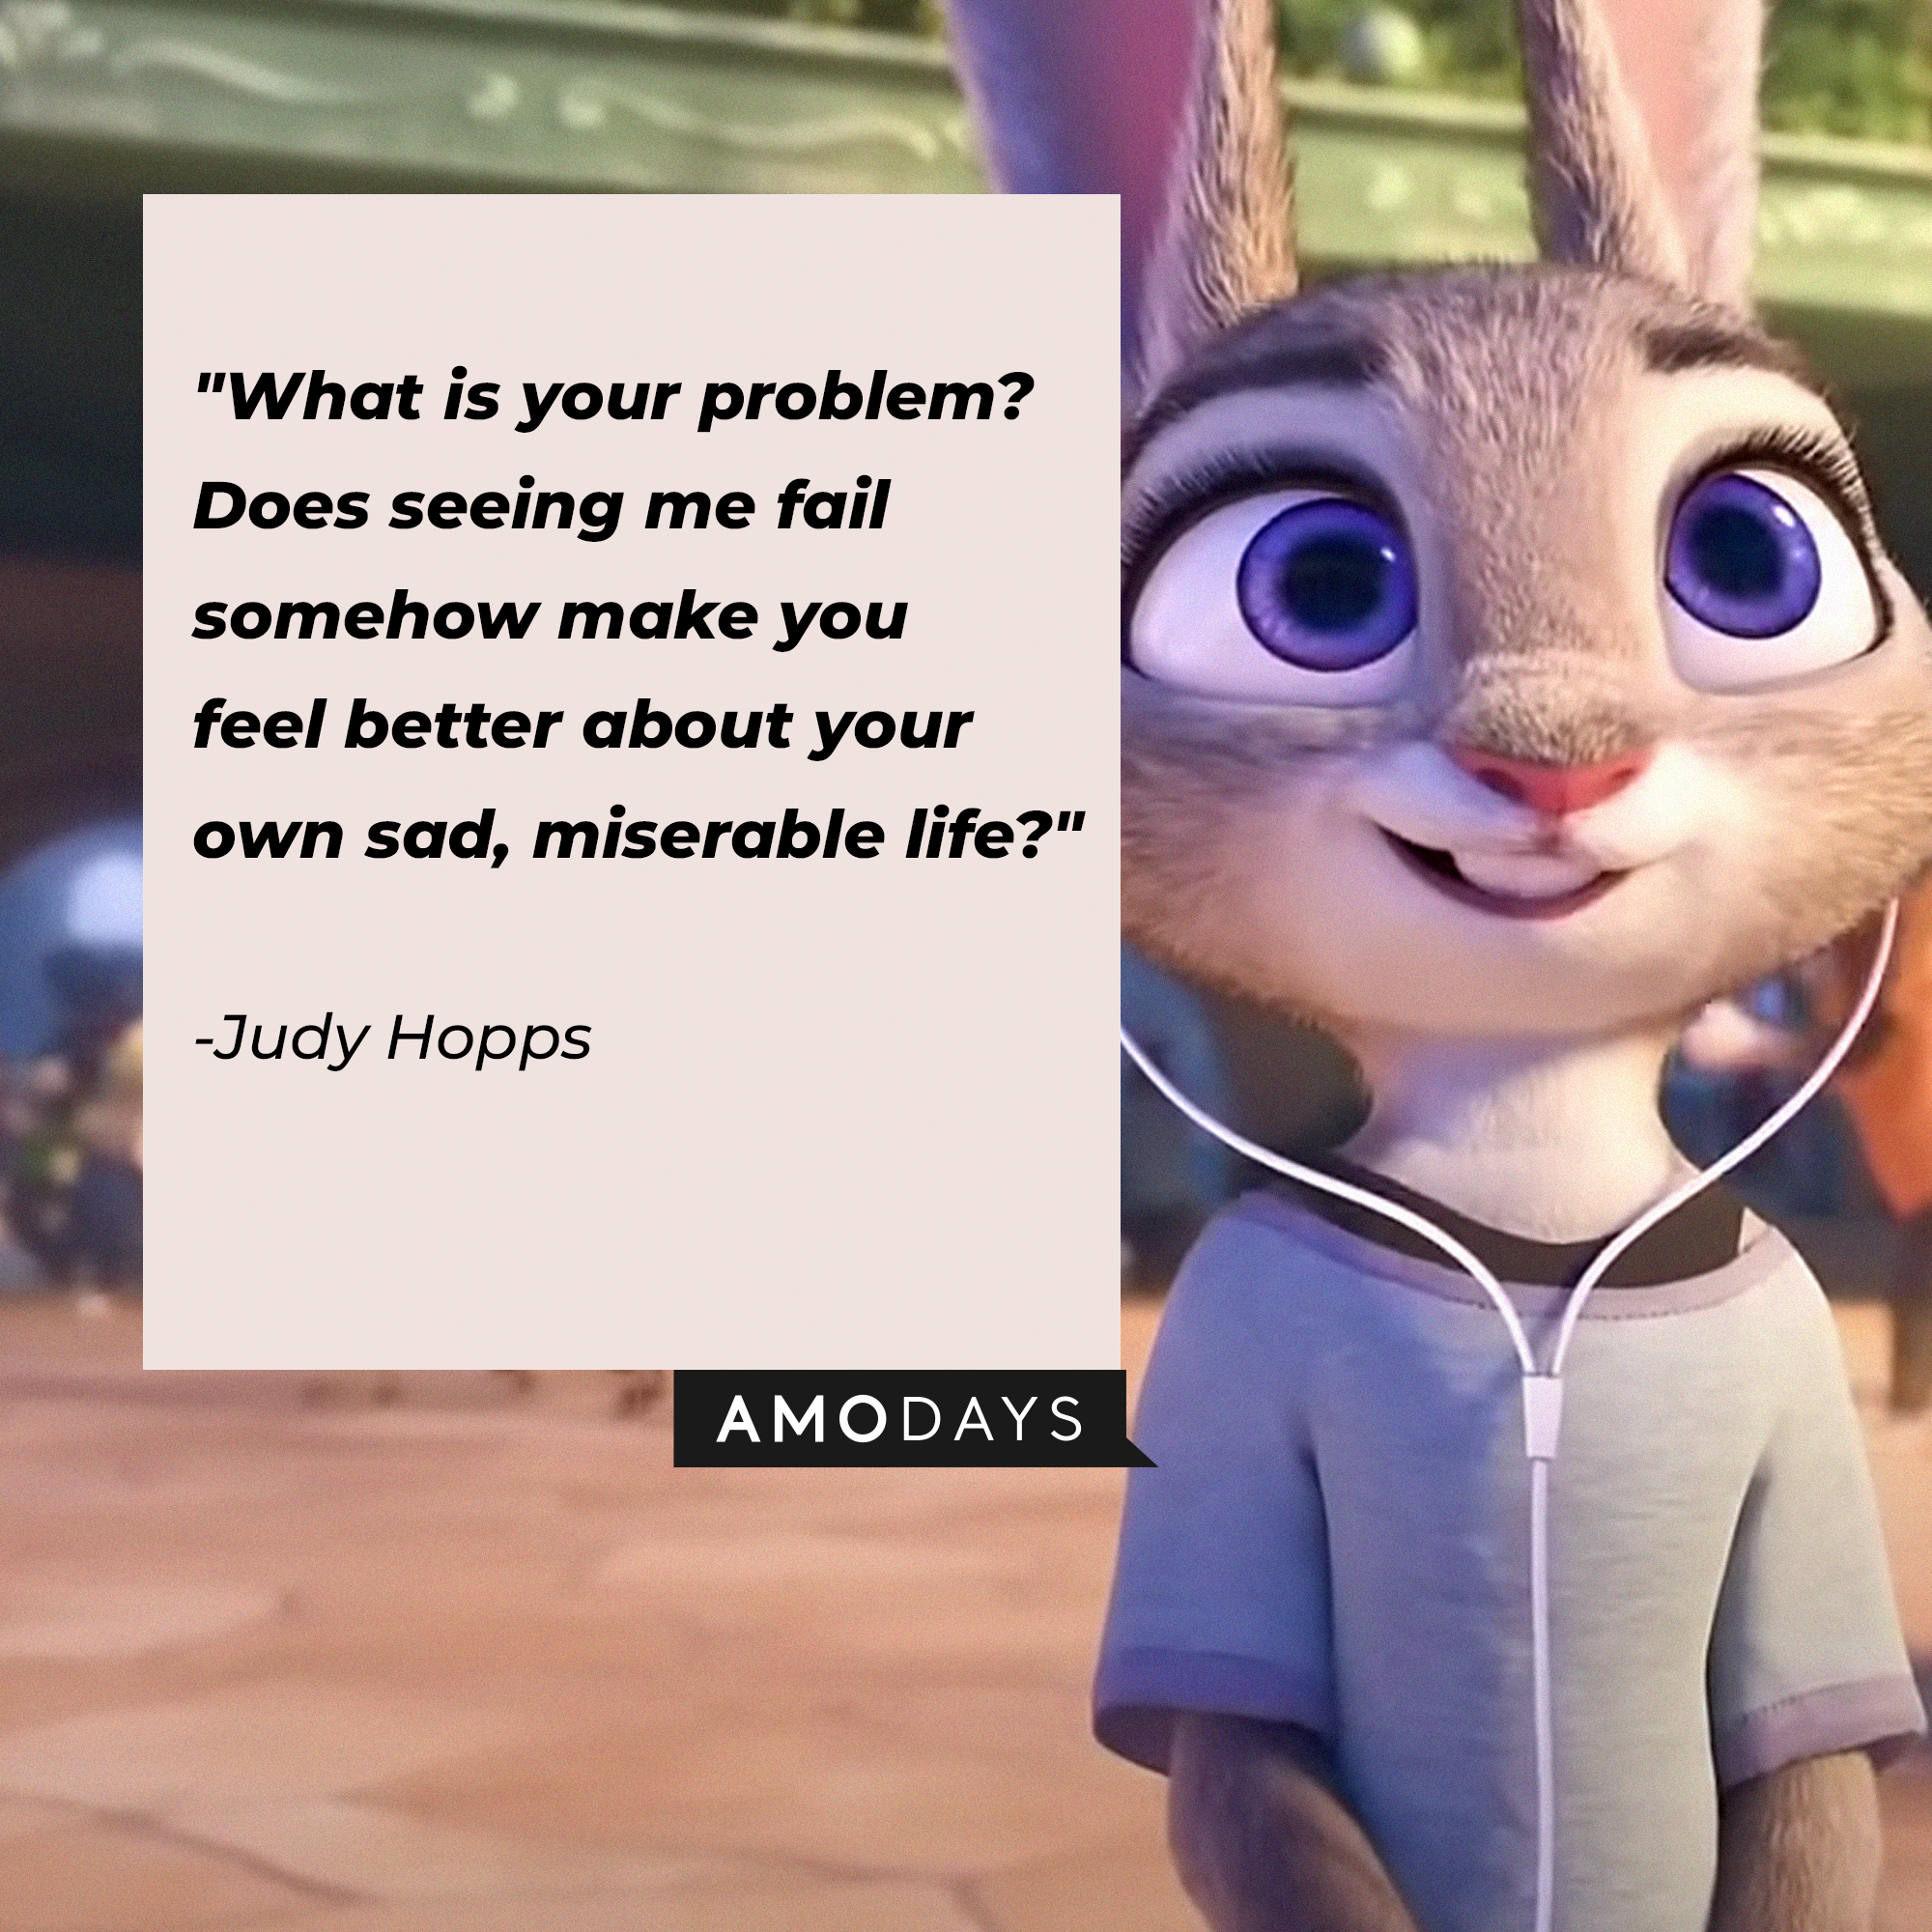 Jody Hopps' quote: "What is your problem? Does seeing me fail somehow make you feel better about your own sad, miserable life?" | Source: facebook.com/DisneyZootopia